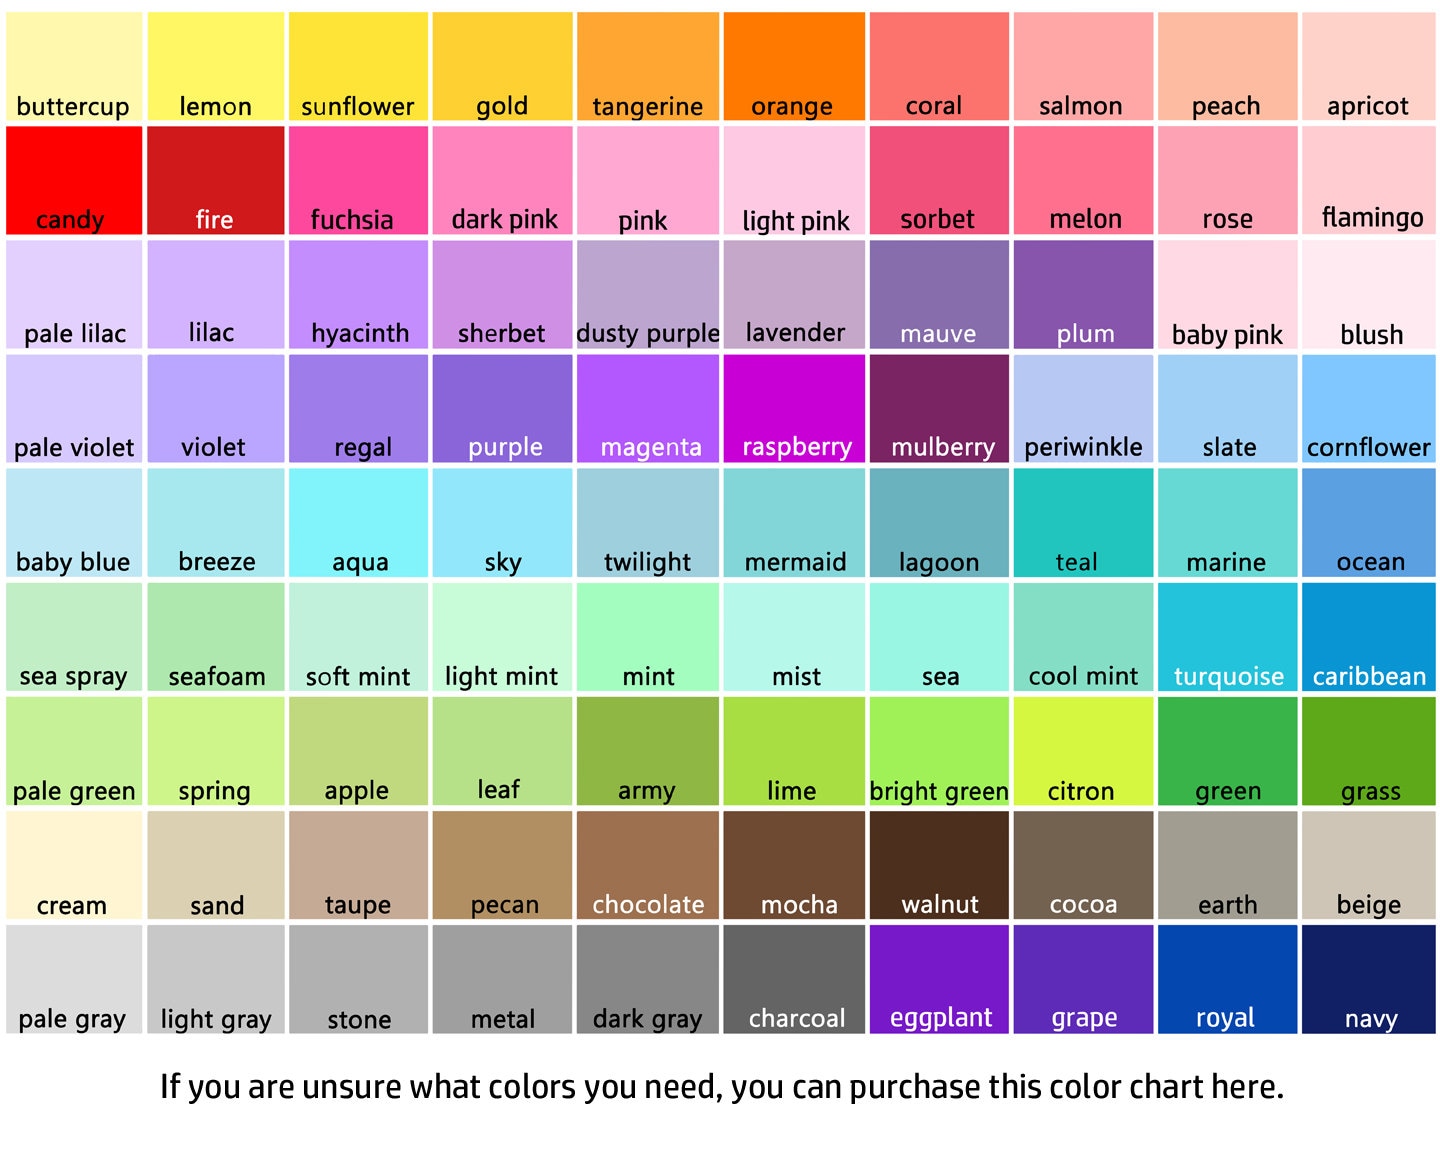 Color Chart 